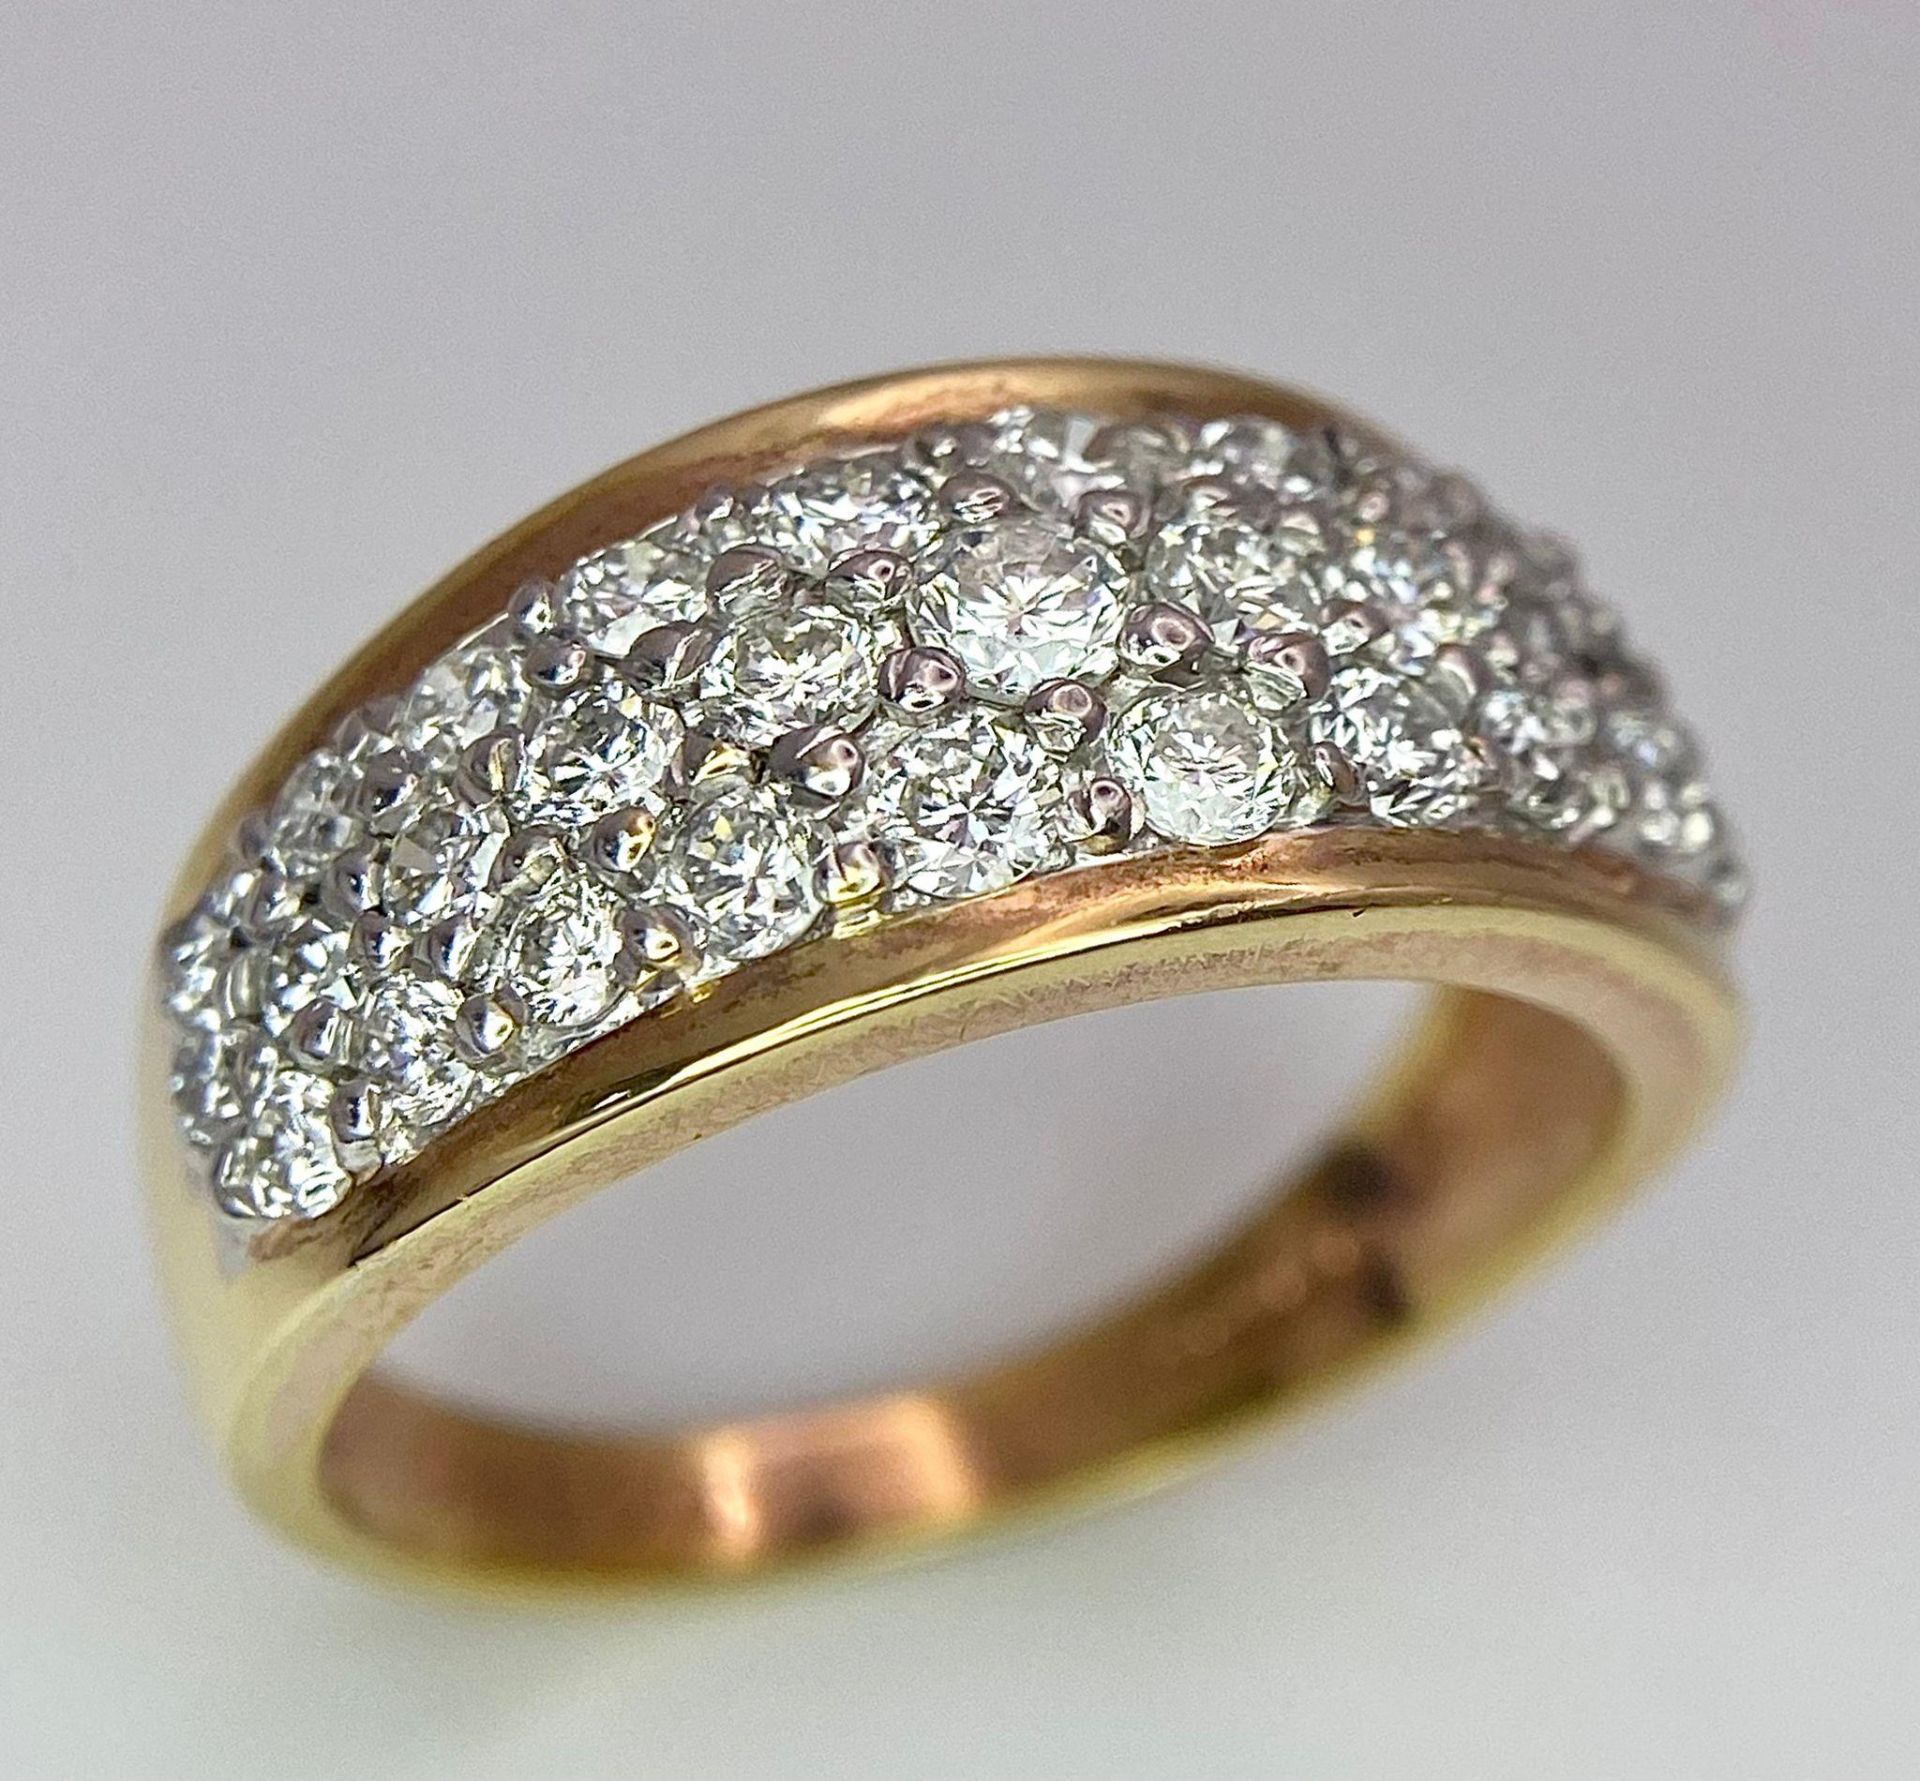 An 18K Yellow Gold Three-Row Cluster Ring. 1ctw. Size M. 5.5g total weight.